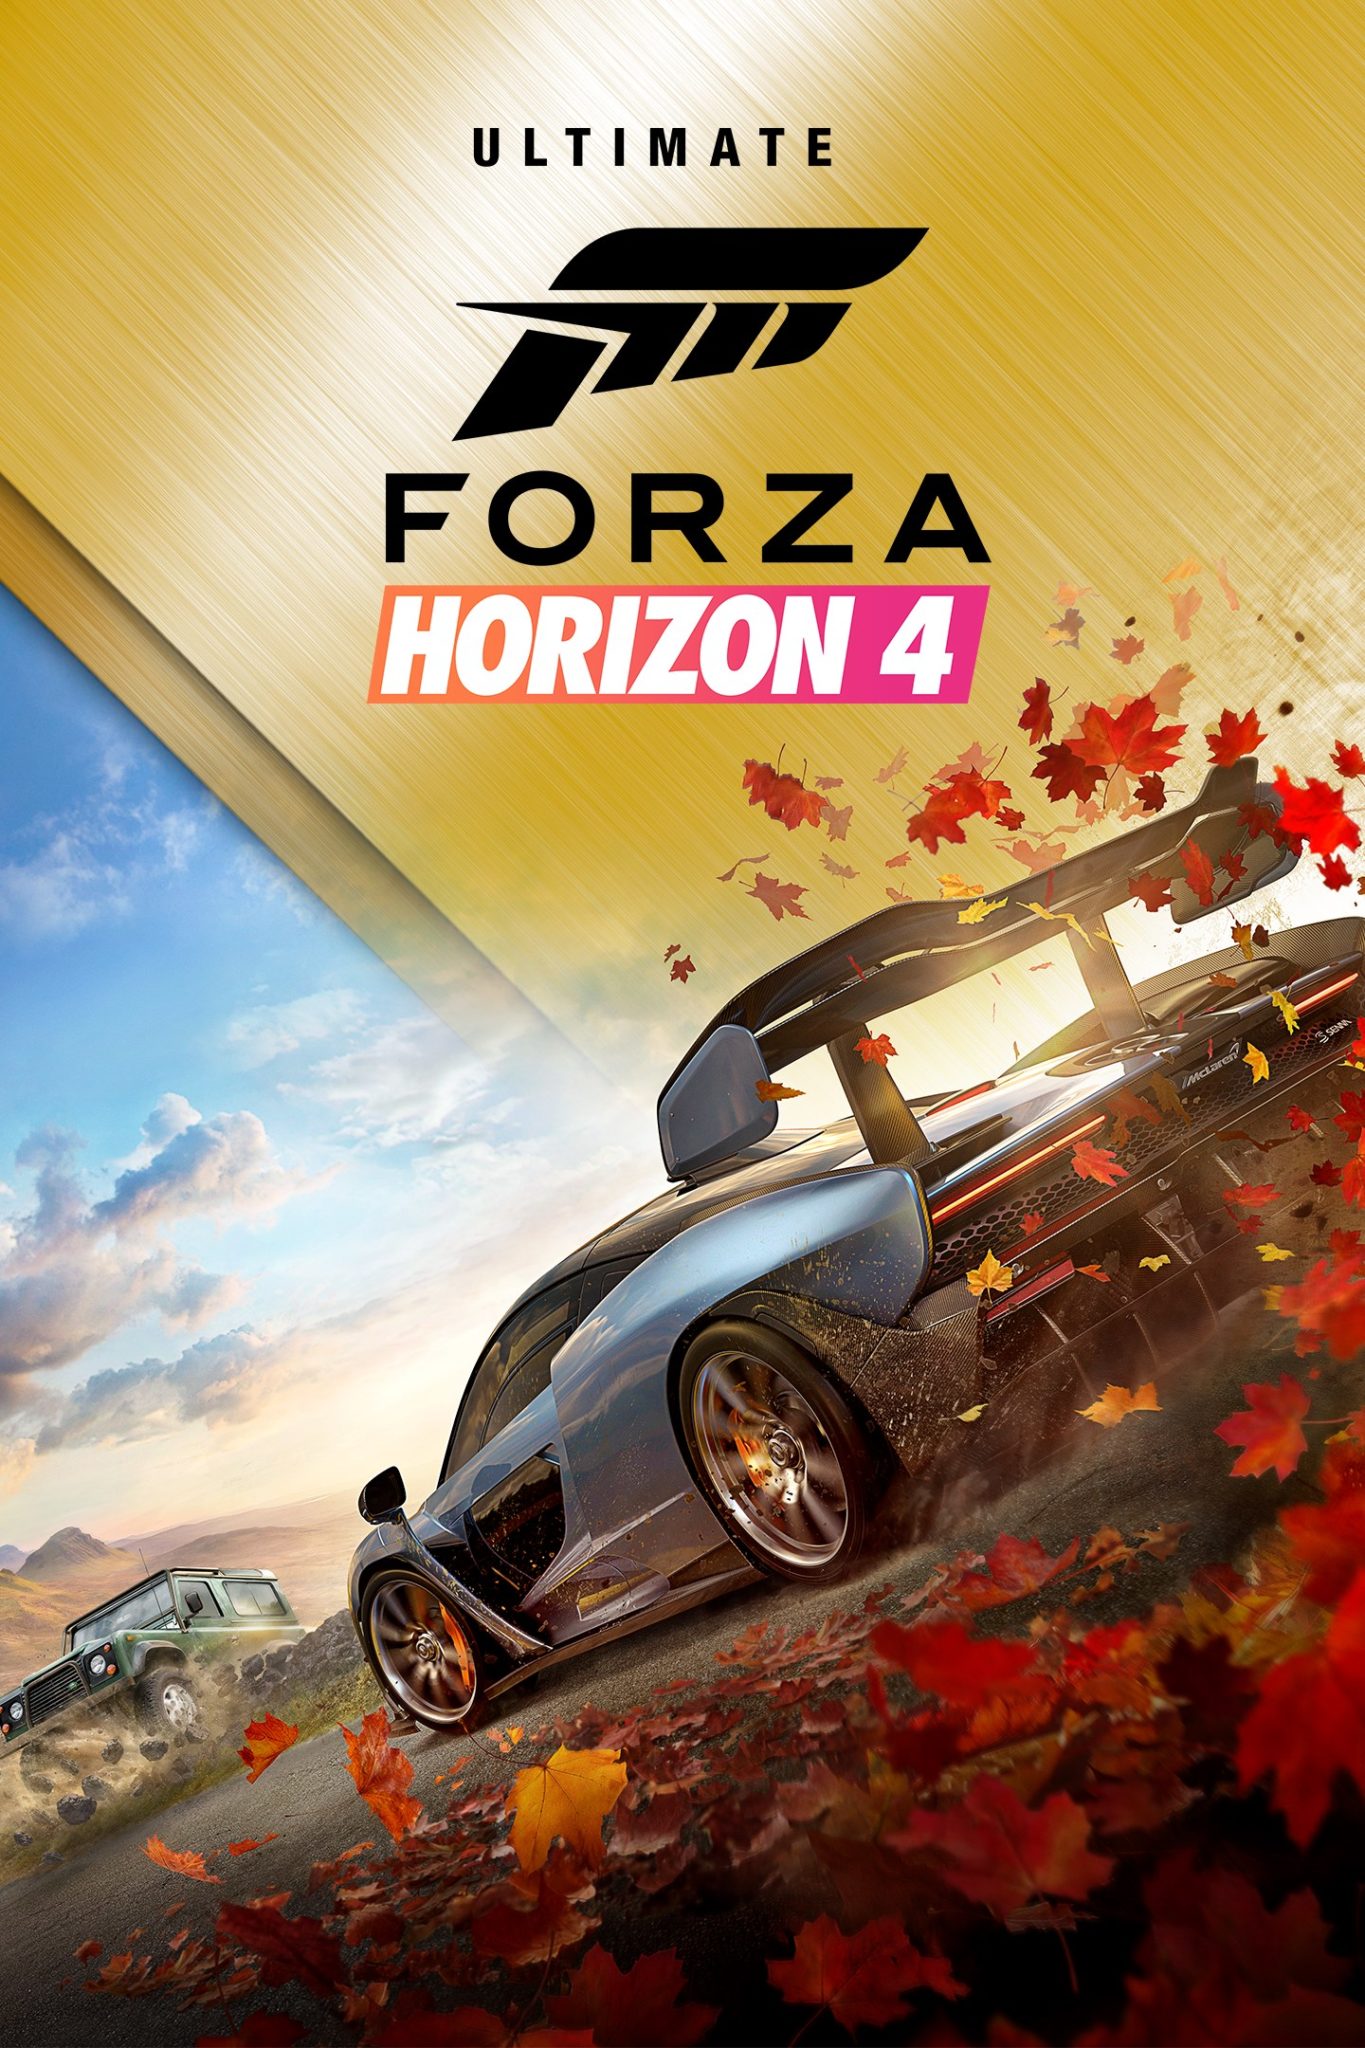 Forza Horizon 4 Ultimate Edition – PC Download – JL Games